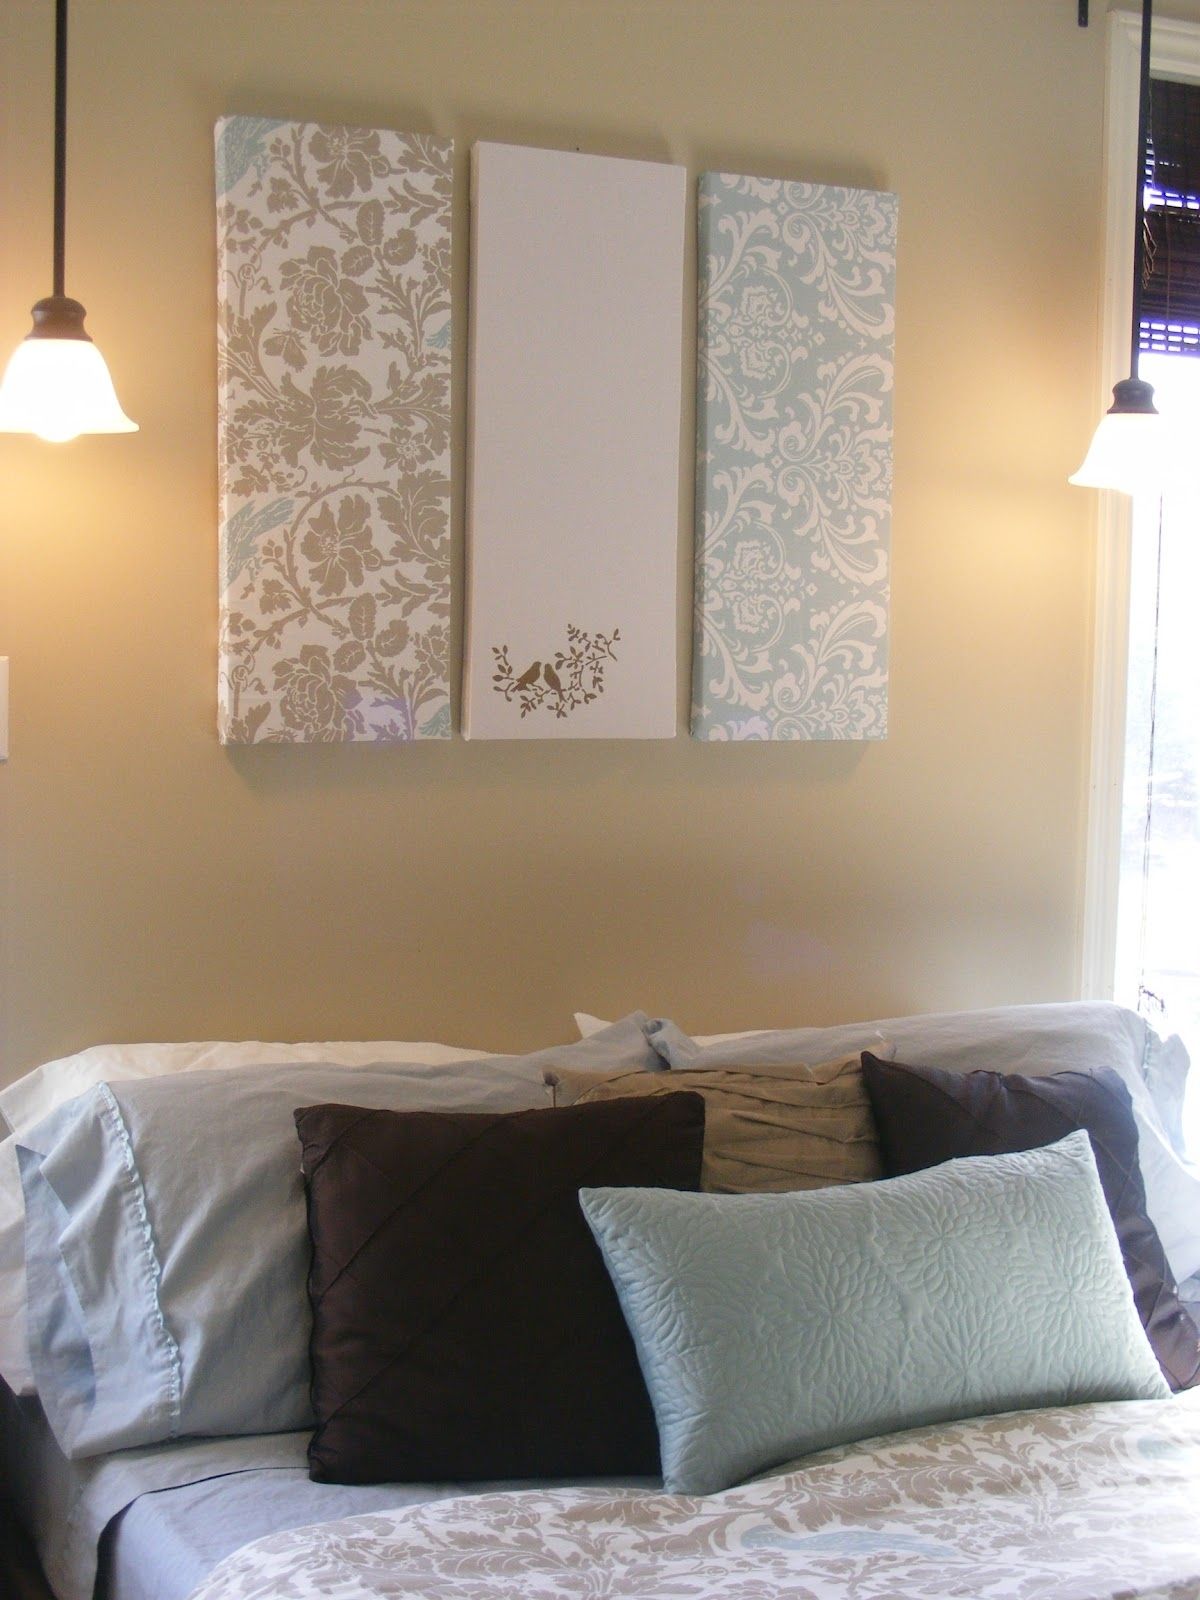 Fabric Covered Foam Wall Art Intended For Most Current The Complete Guide To Imperfect Homemaking: Simple, Thrifty Diy Art (View 2 of 15)